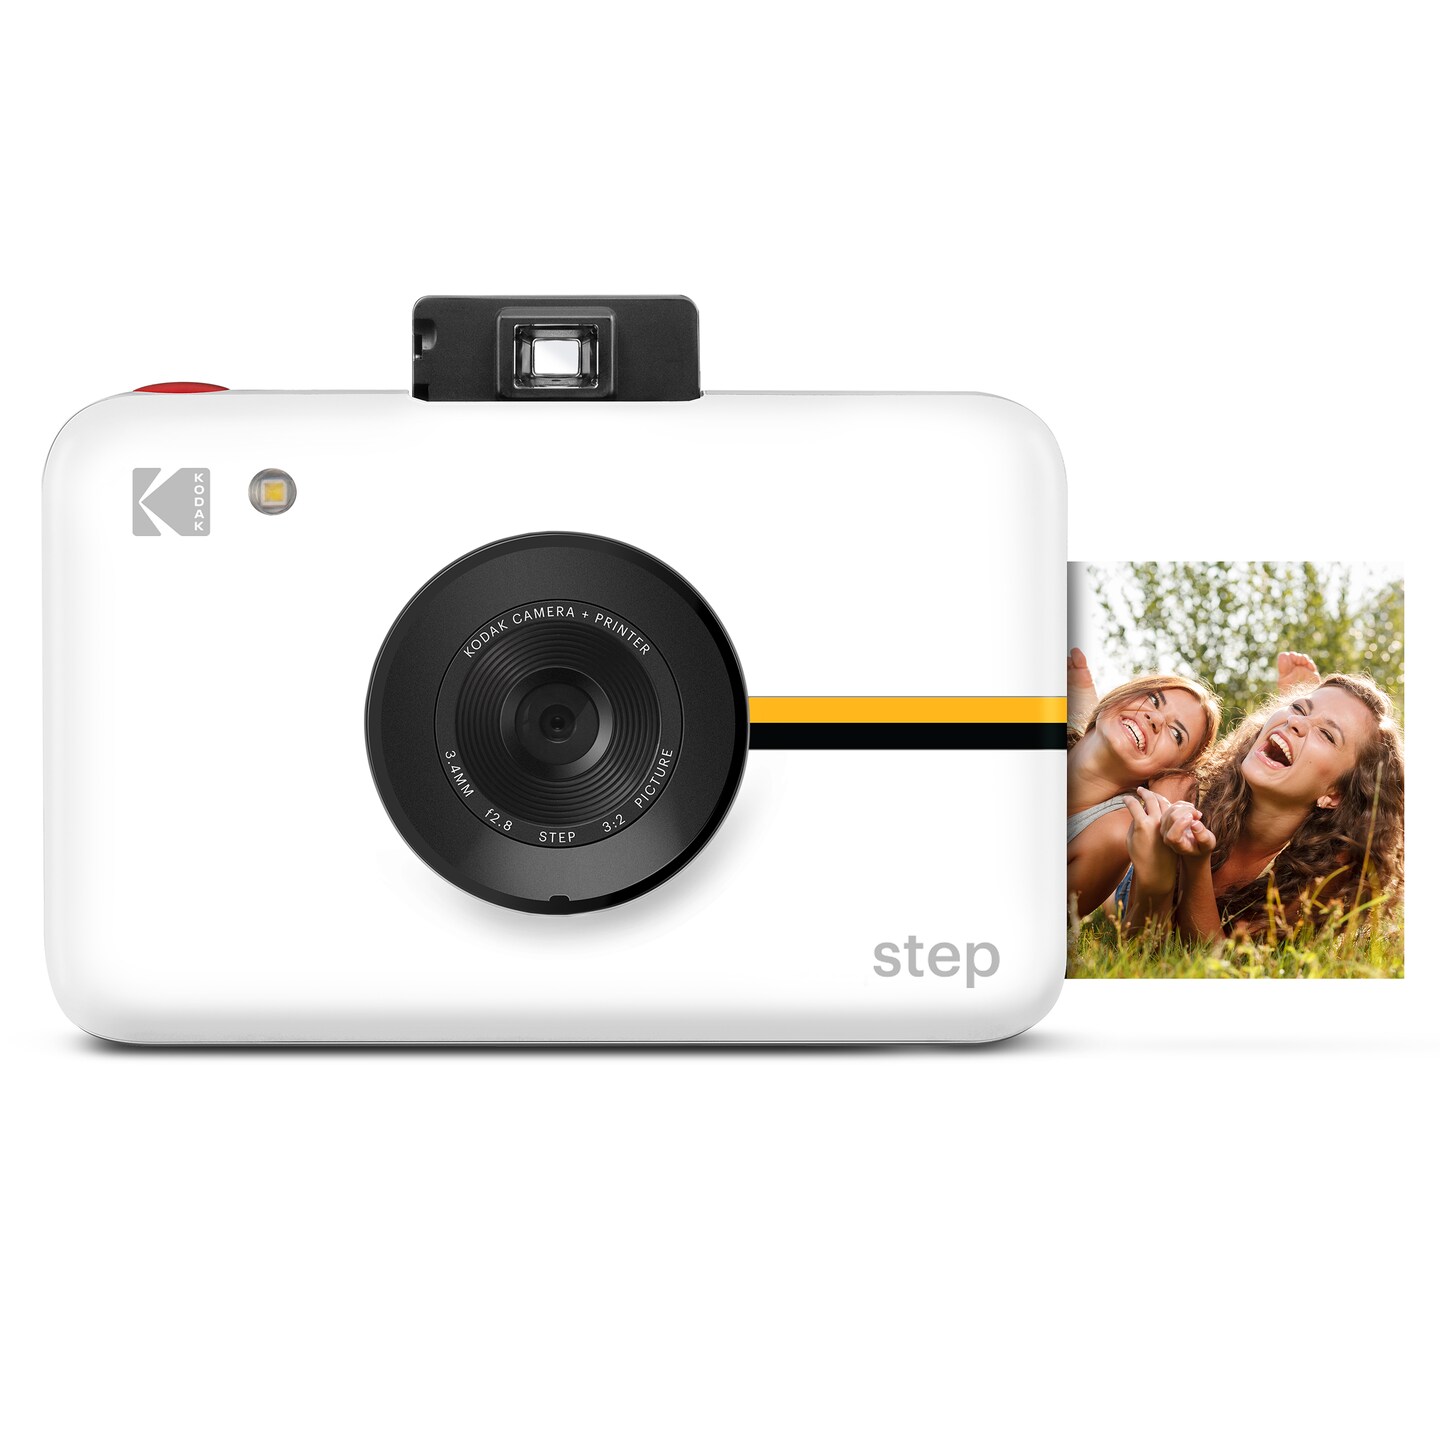 Kodak Step Digital Instant Camera with 10MP Image Sensor, ZINK Technology, Built-in Flash &#x26; 6 Picture Modes